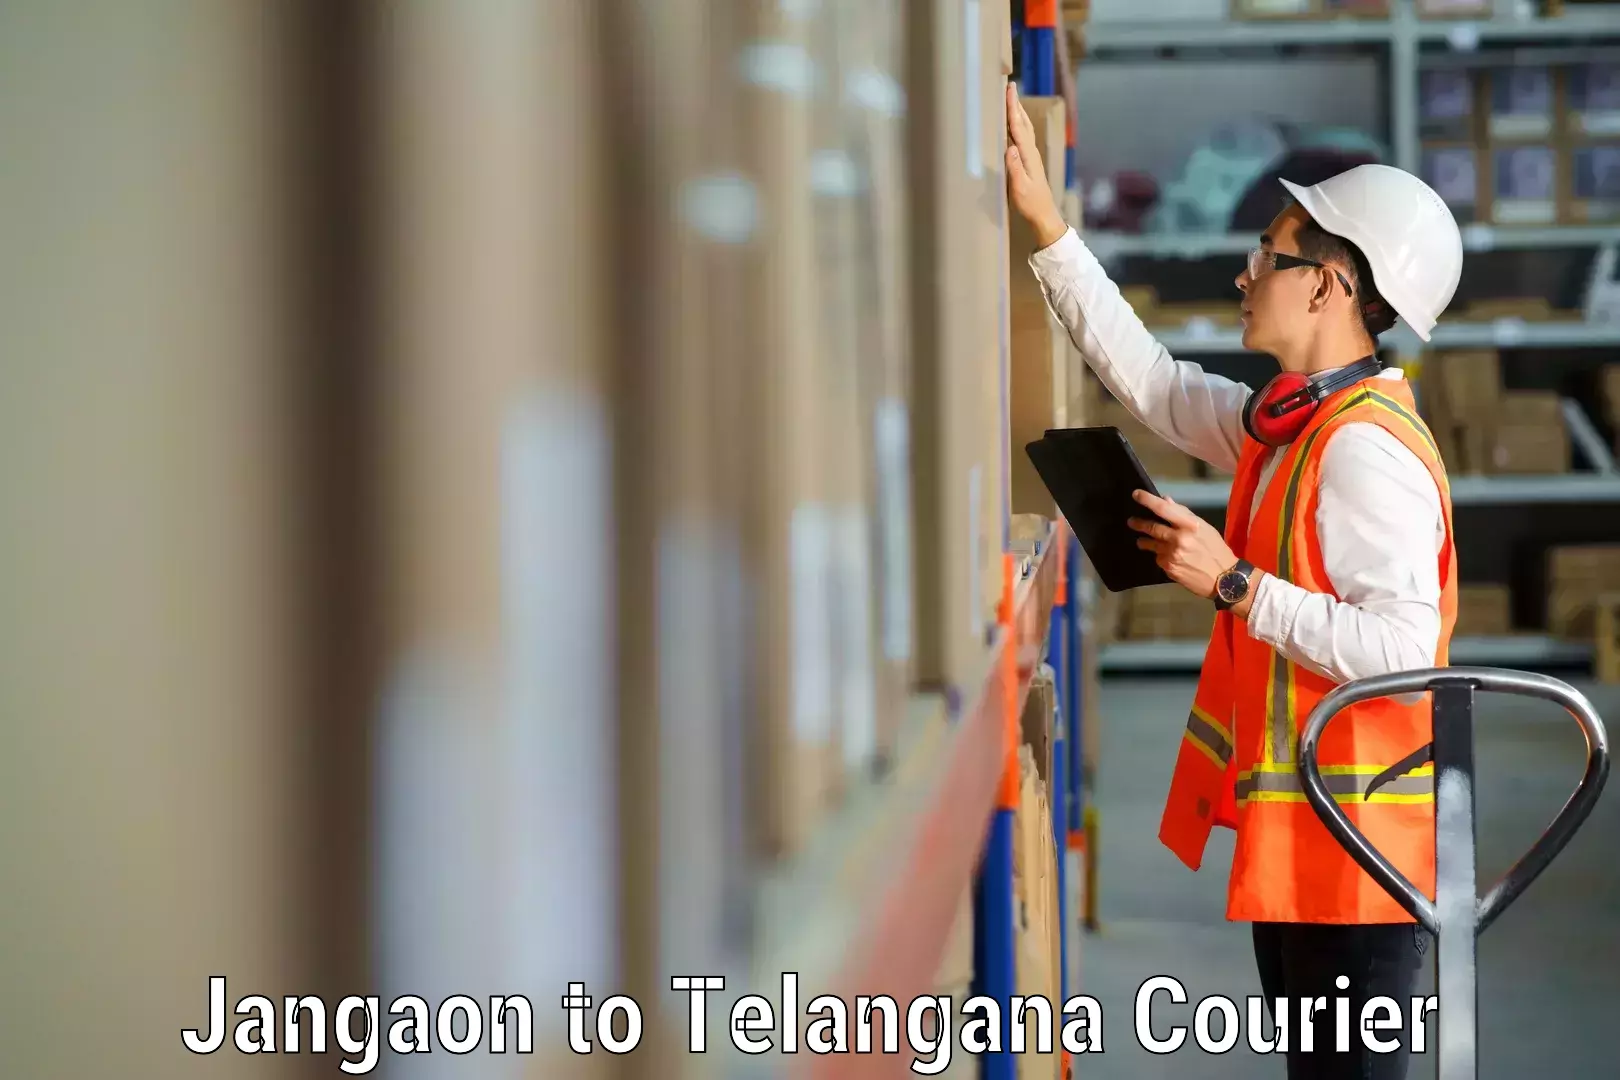 Quality relocation assistance in Jangaon to Bhainsa